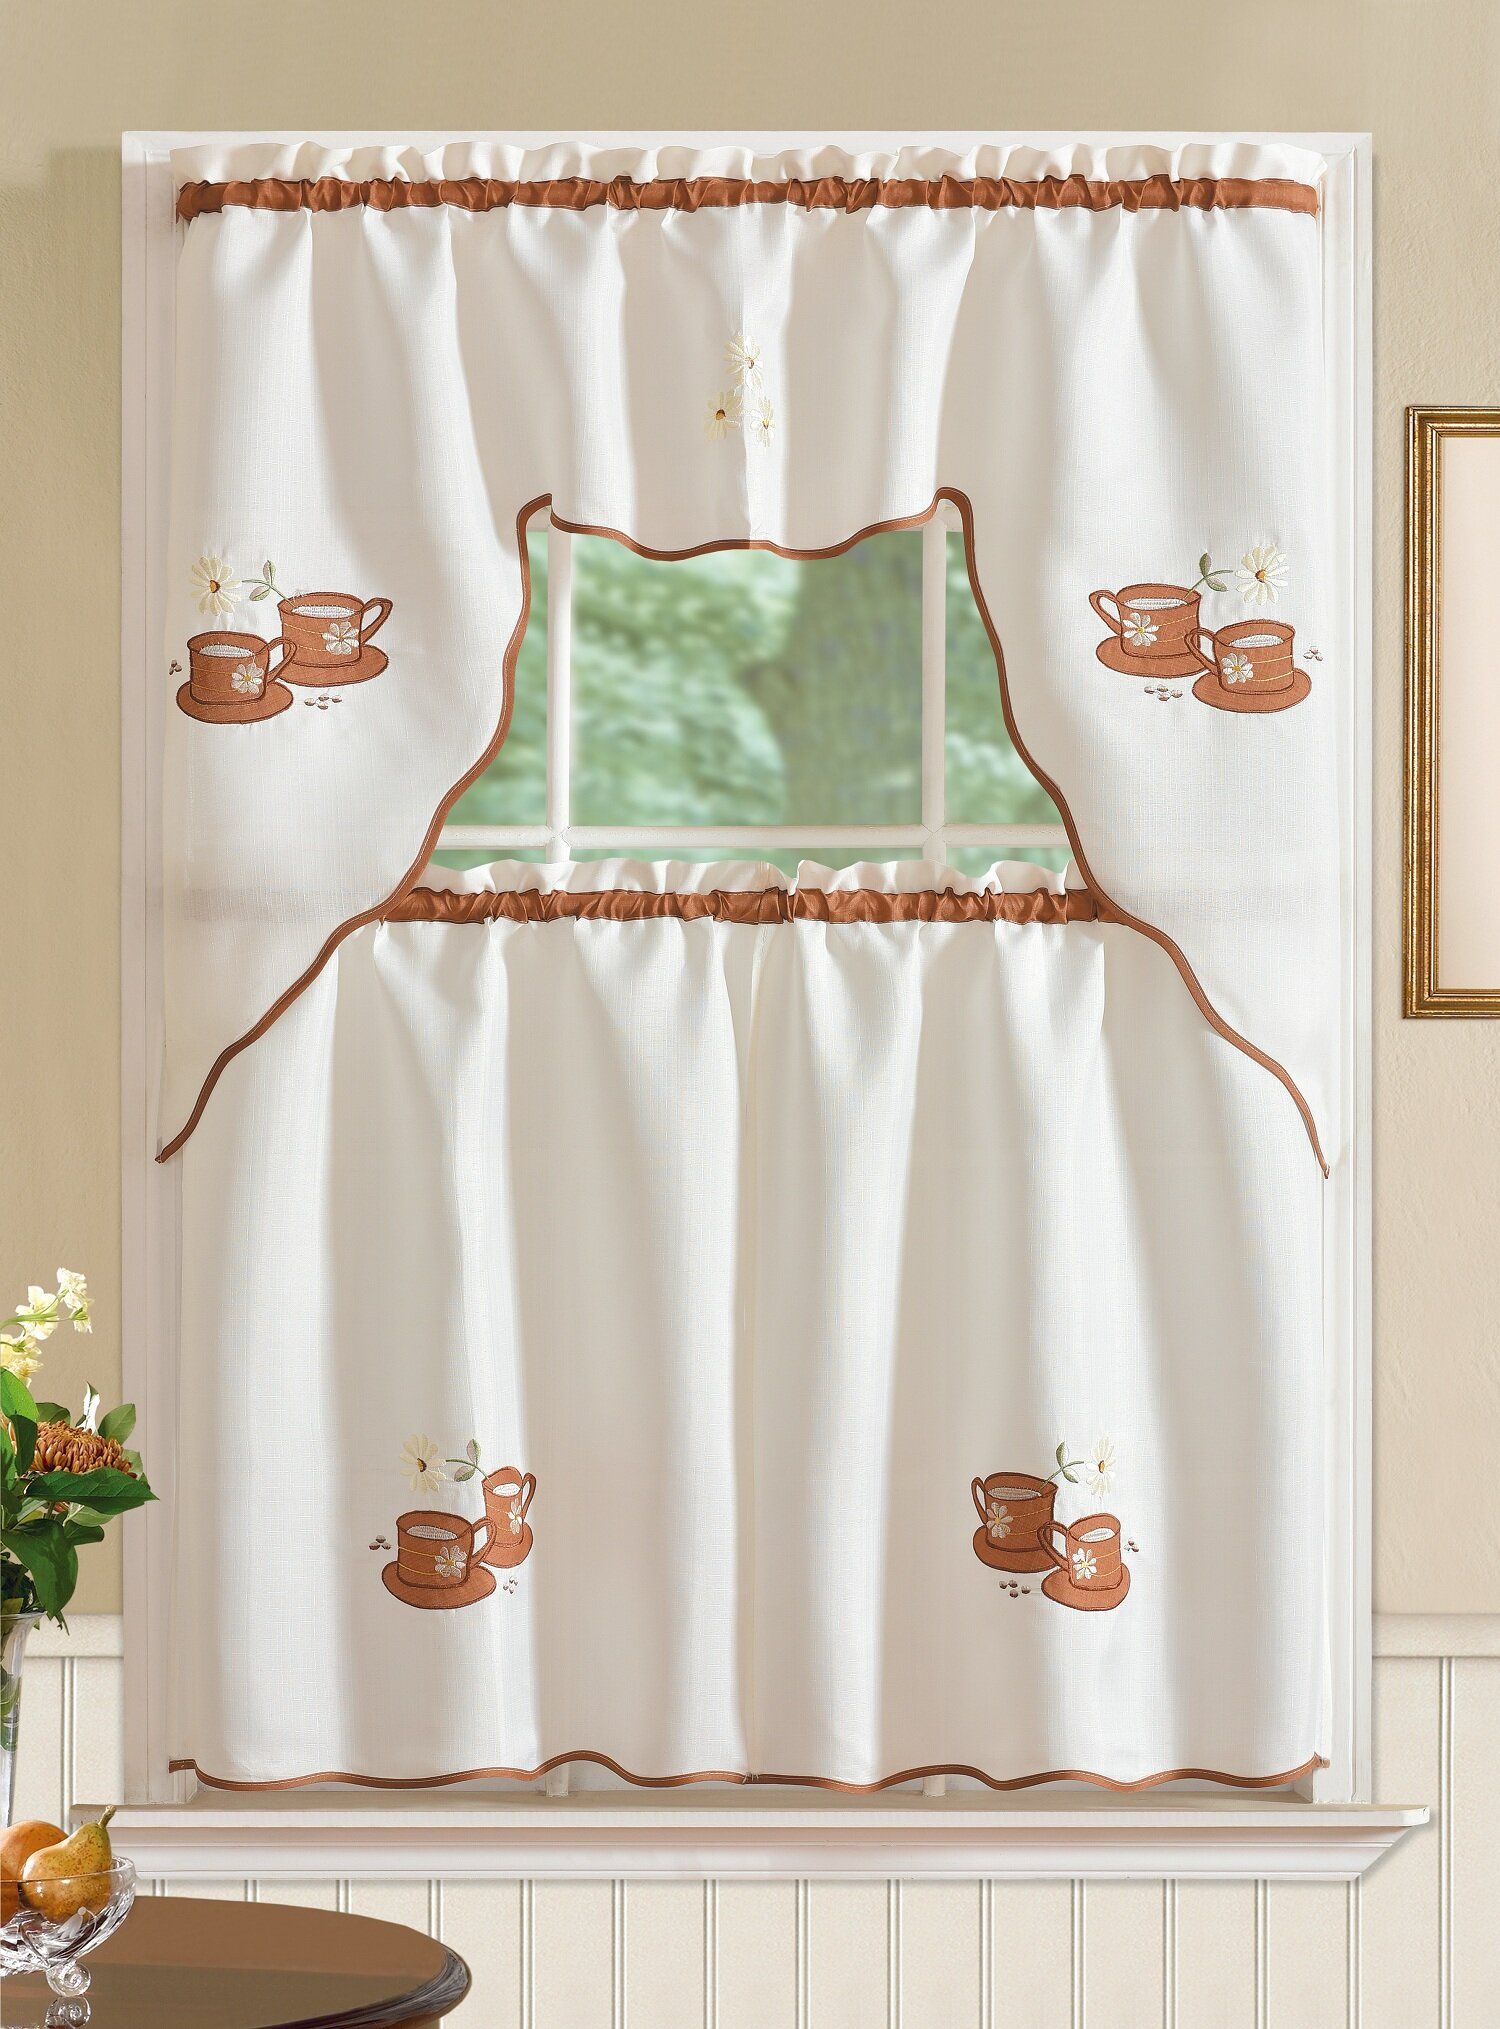 Mayer Coffee 3 Piece Kitchen Curtain Set With Regard To Twill 3 Piece Kitchen Curtain Tier Sets (View 16 of 20)